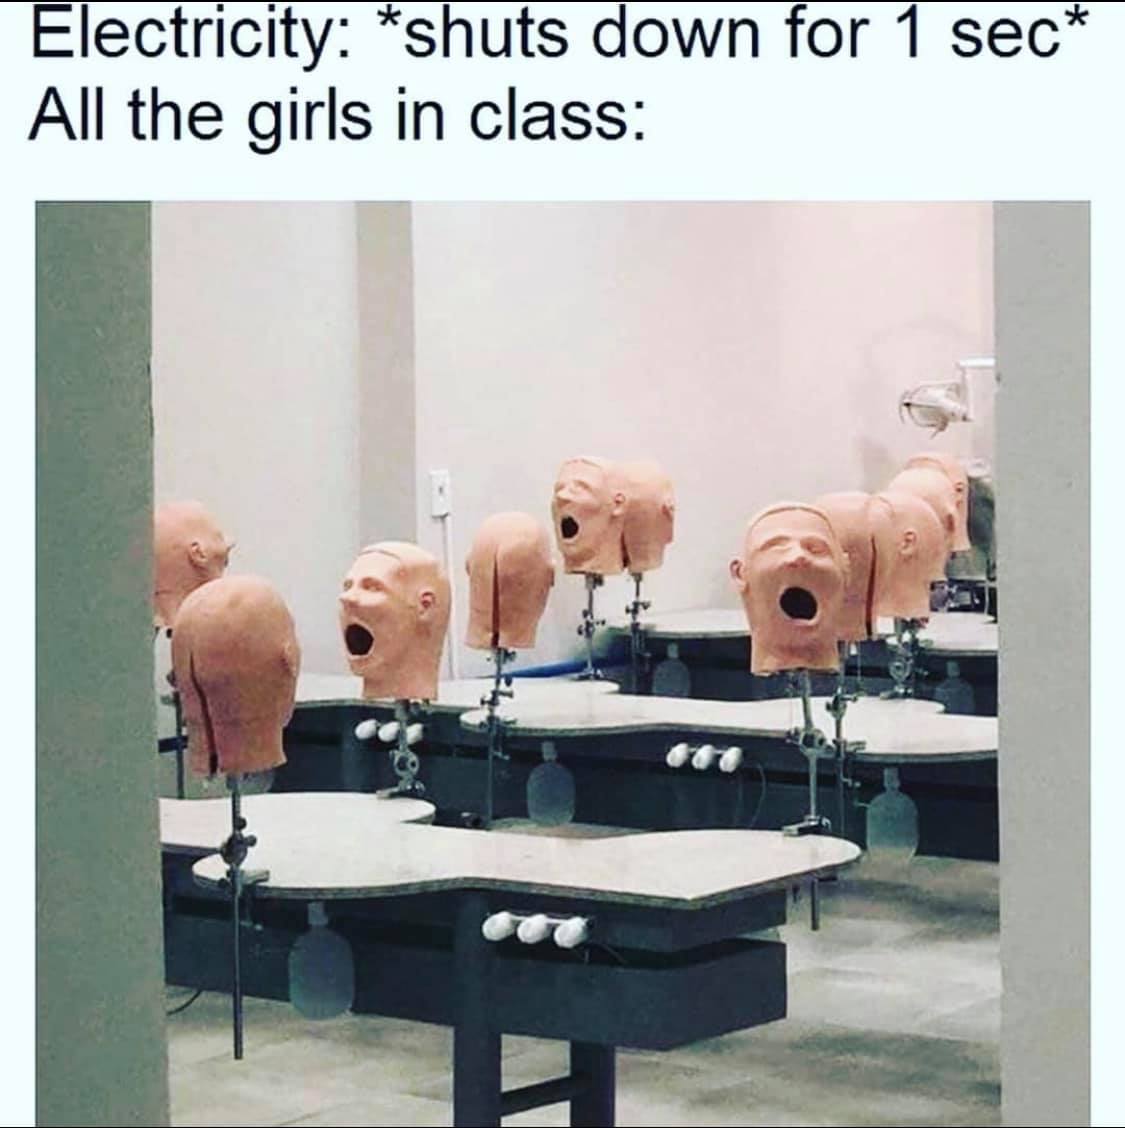 halo theme meme - Electricity shuts down for 1 sec All the girls in class